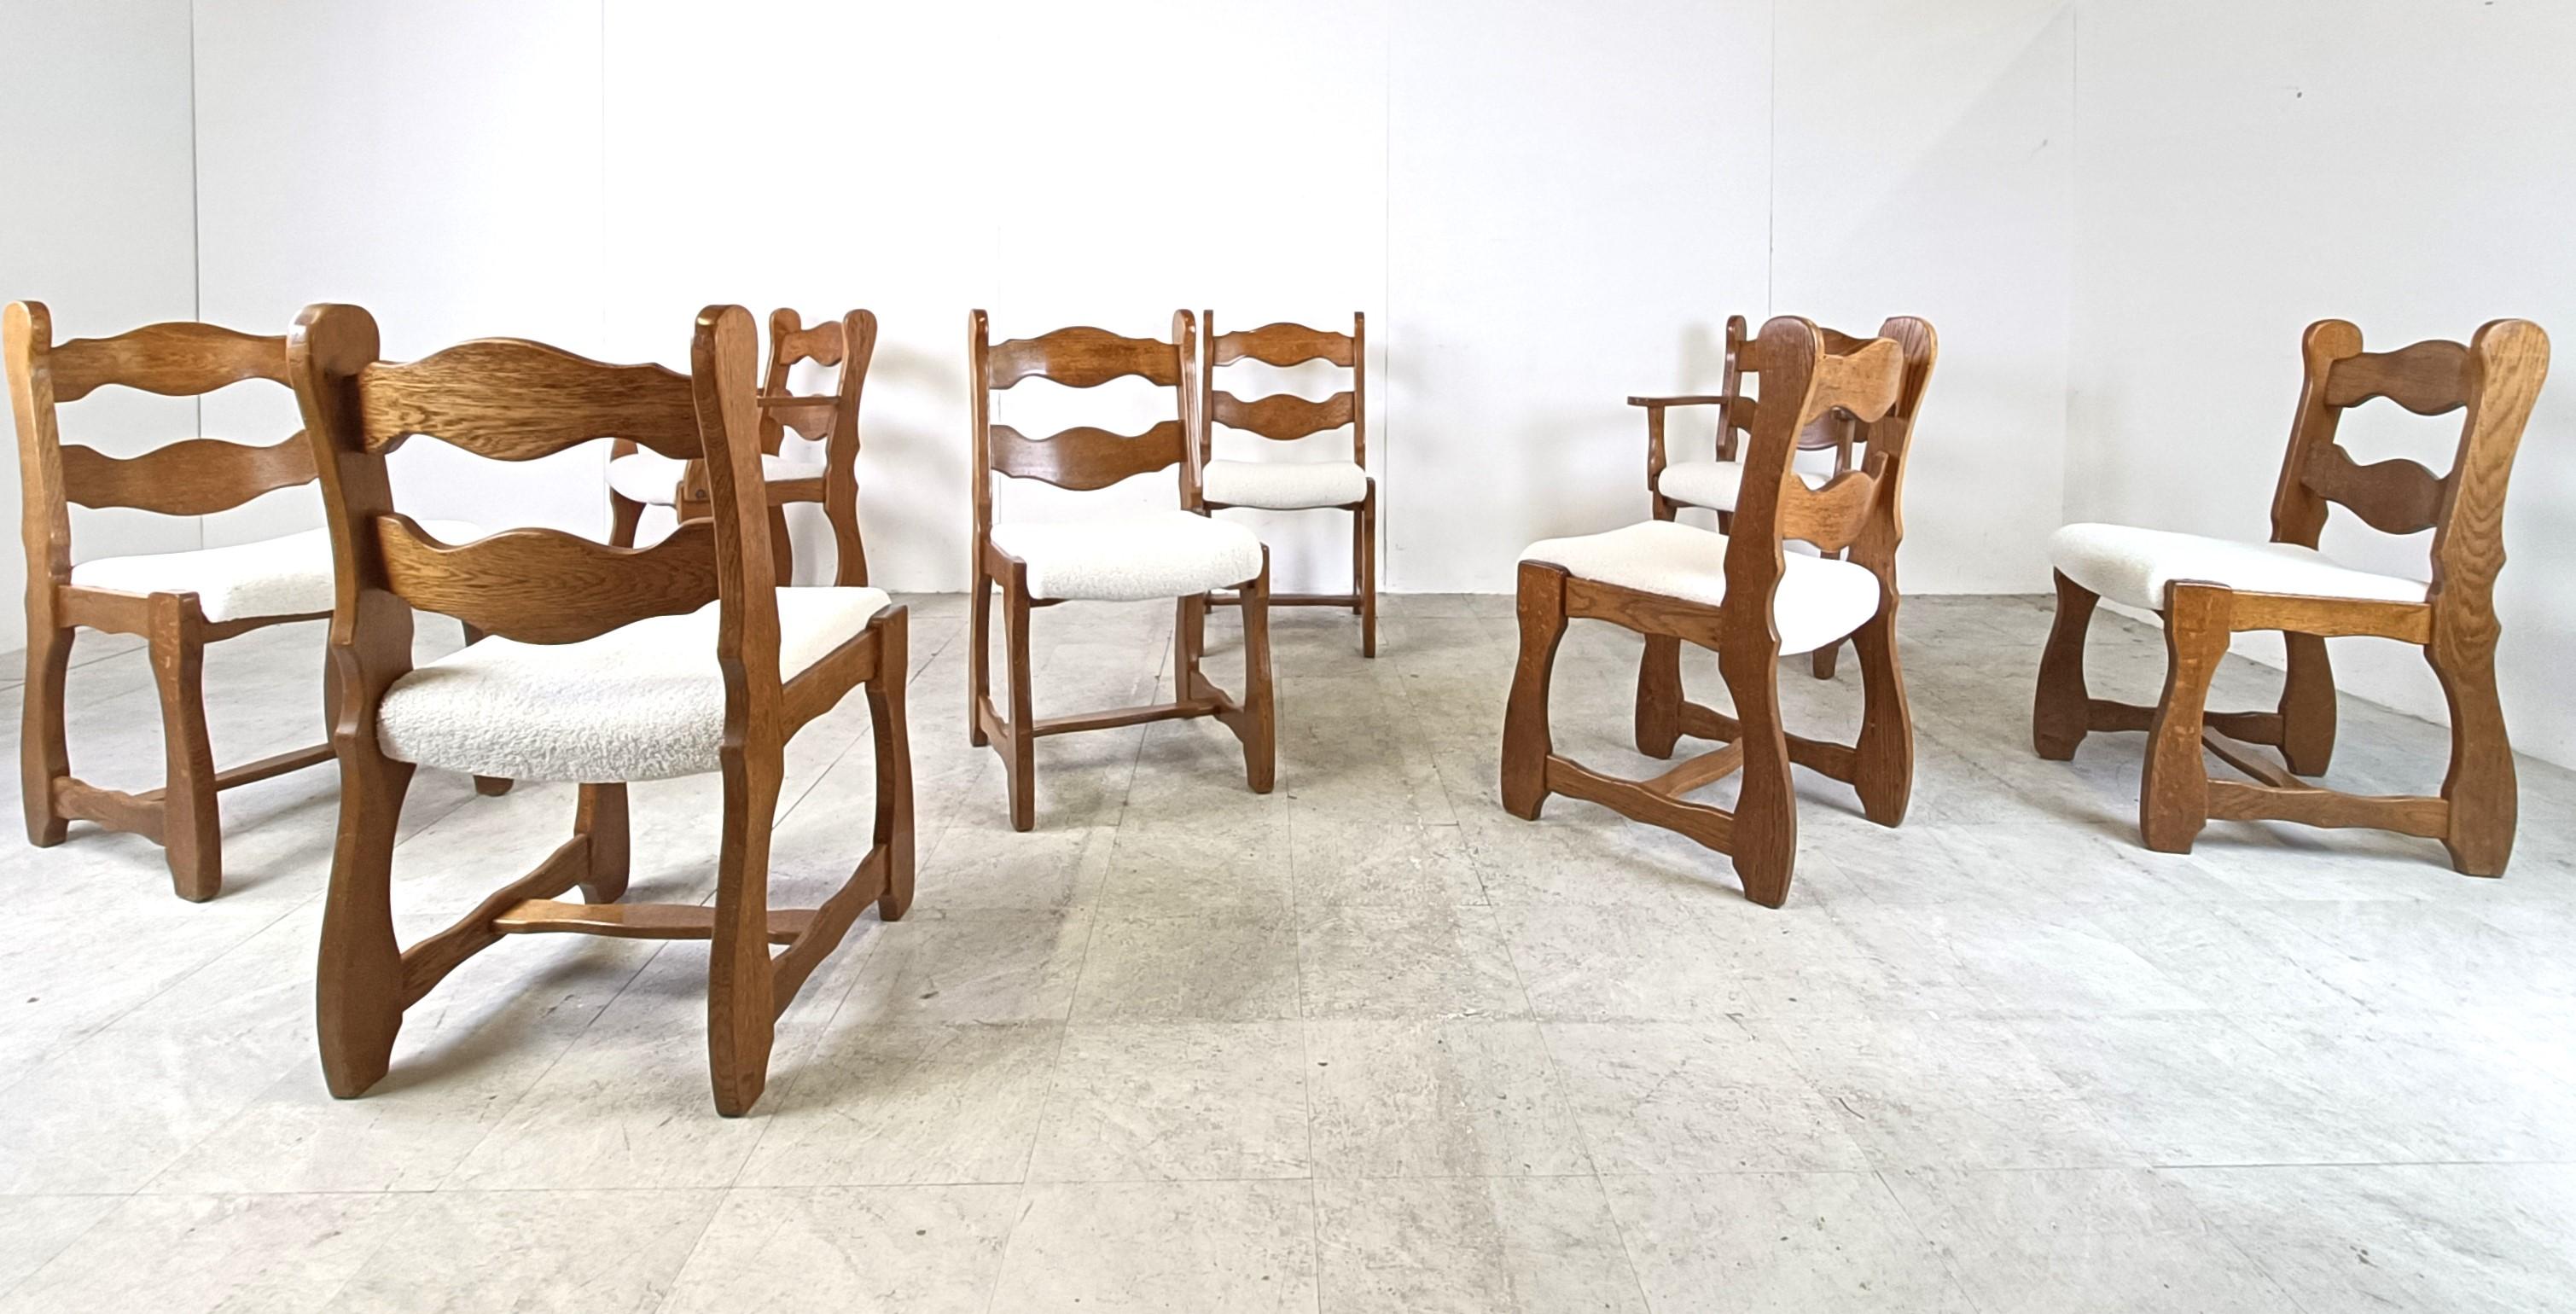 Vintage brutalist dining chairs, set of 8 - 1960s 4